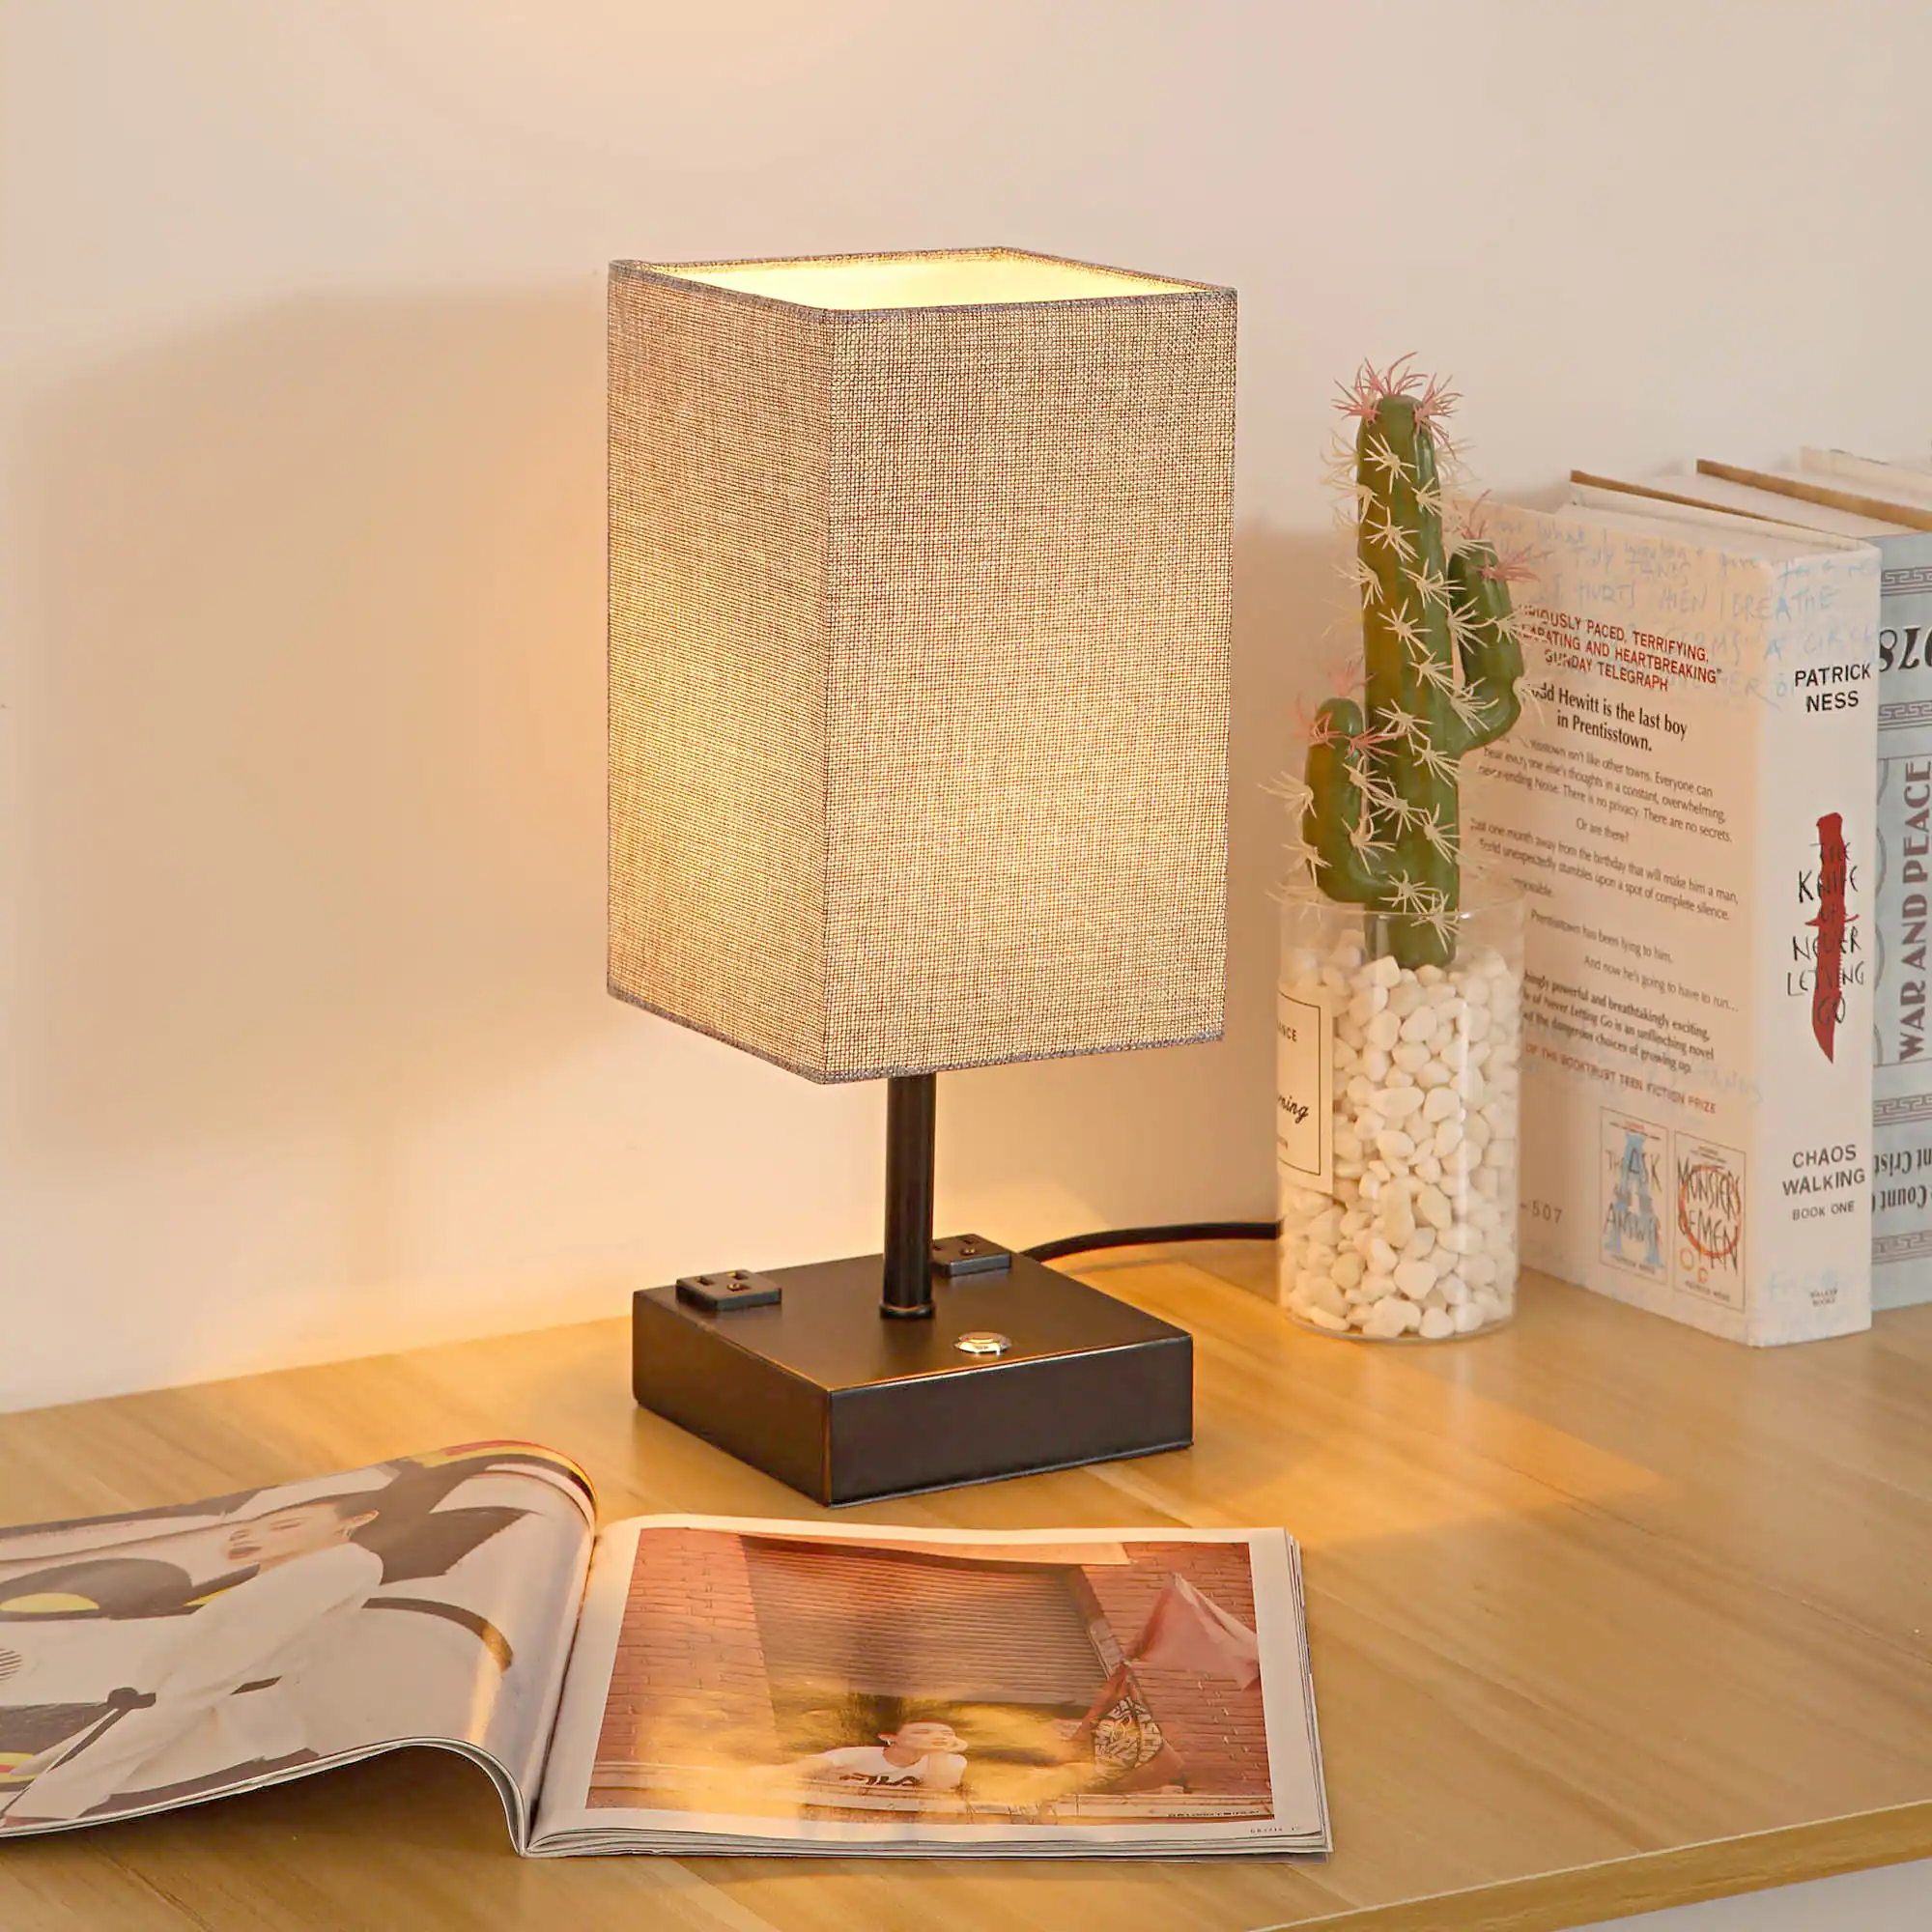 Table Lamp With Usb Charging Port And Outlet redefines convenience